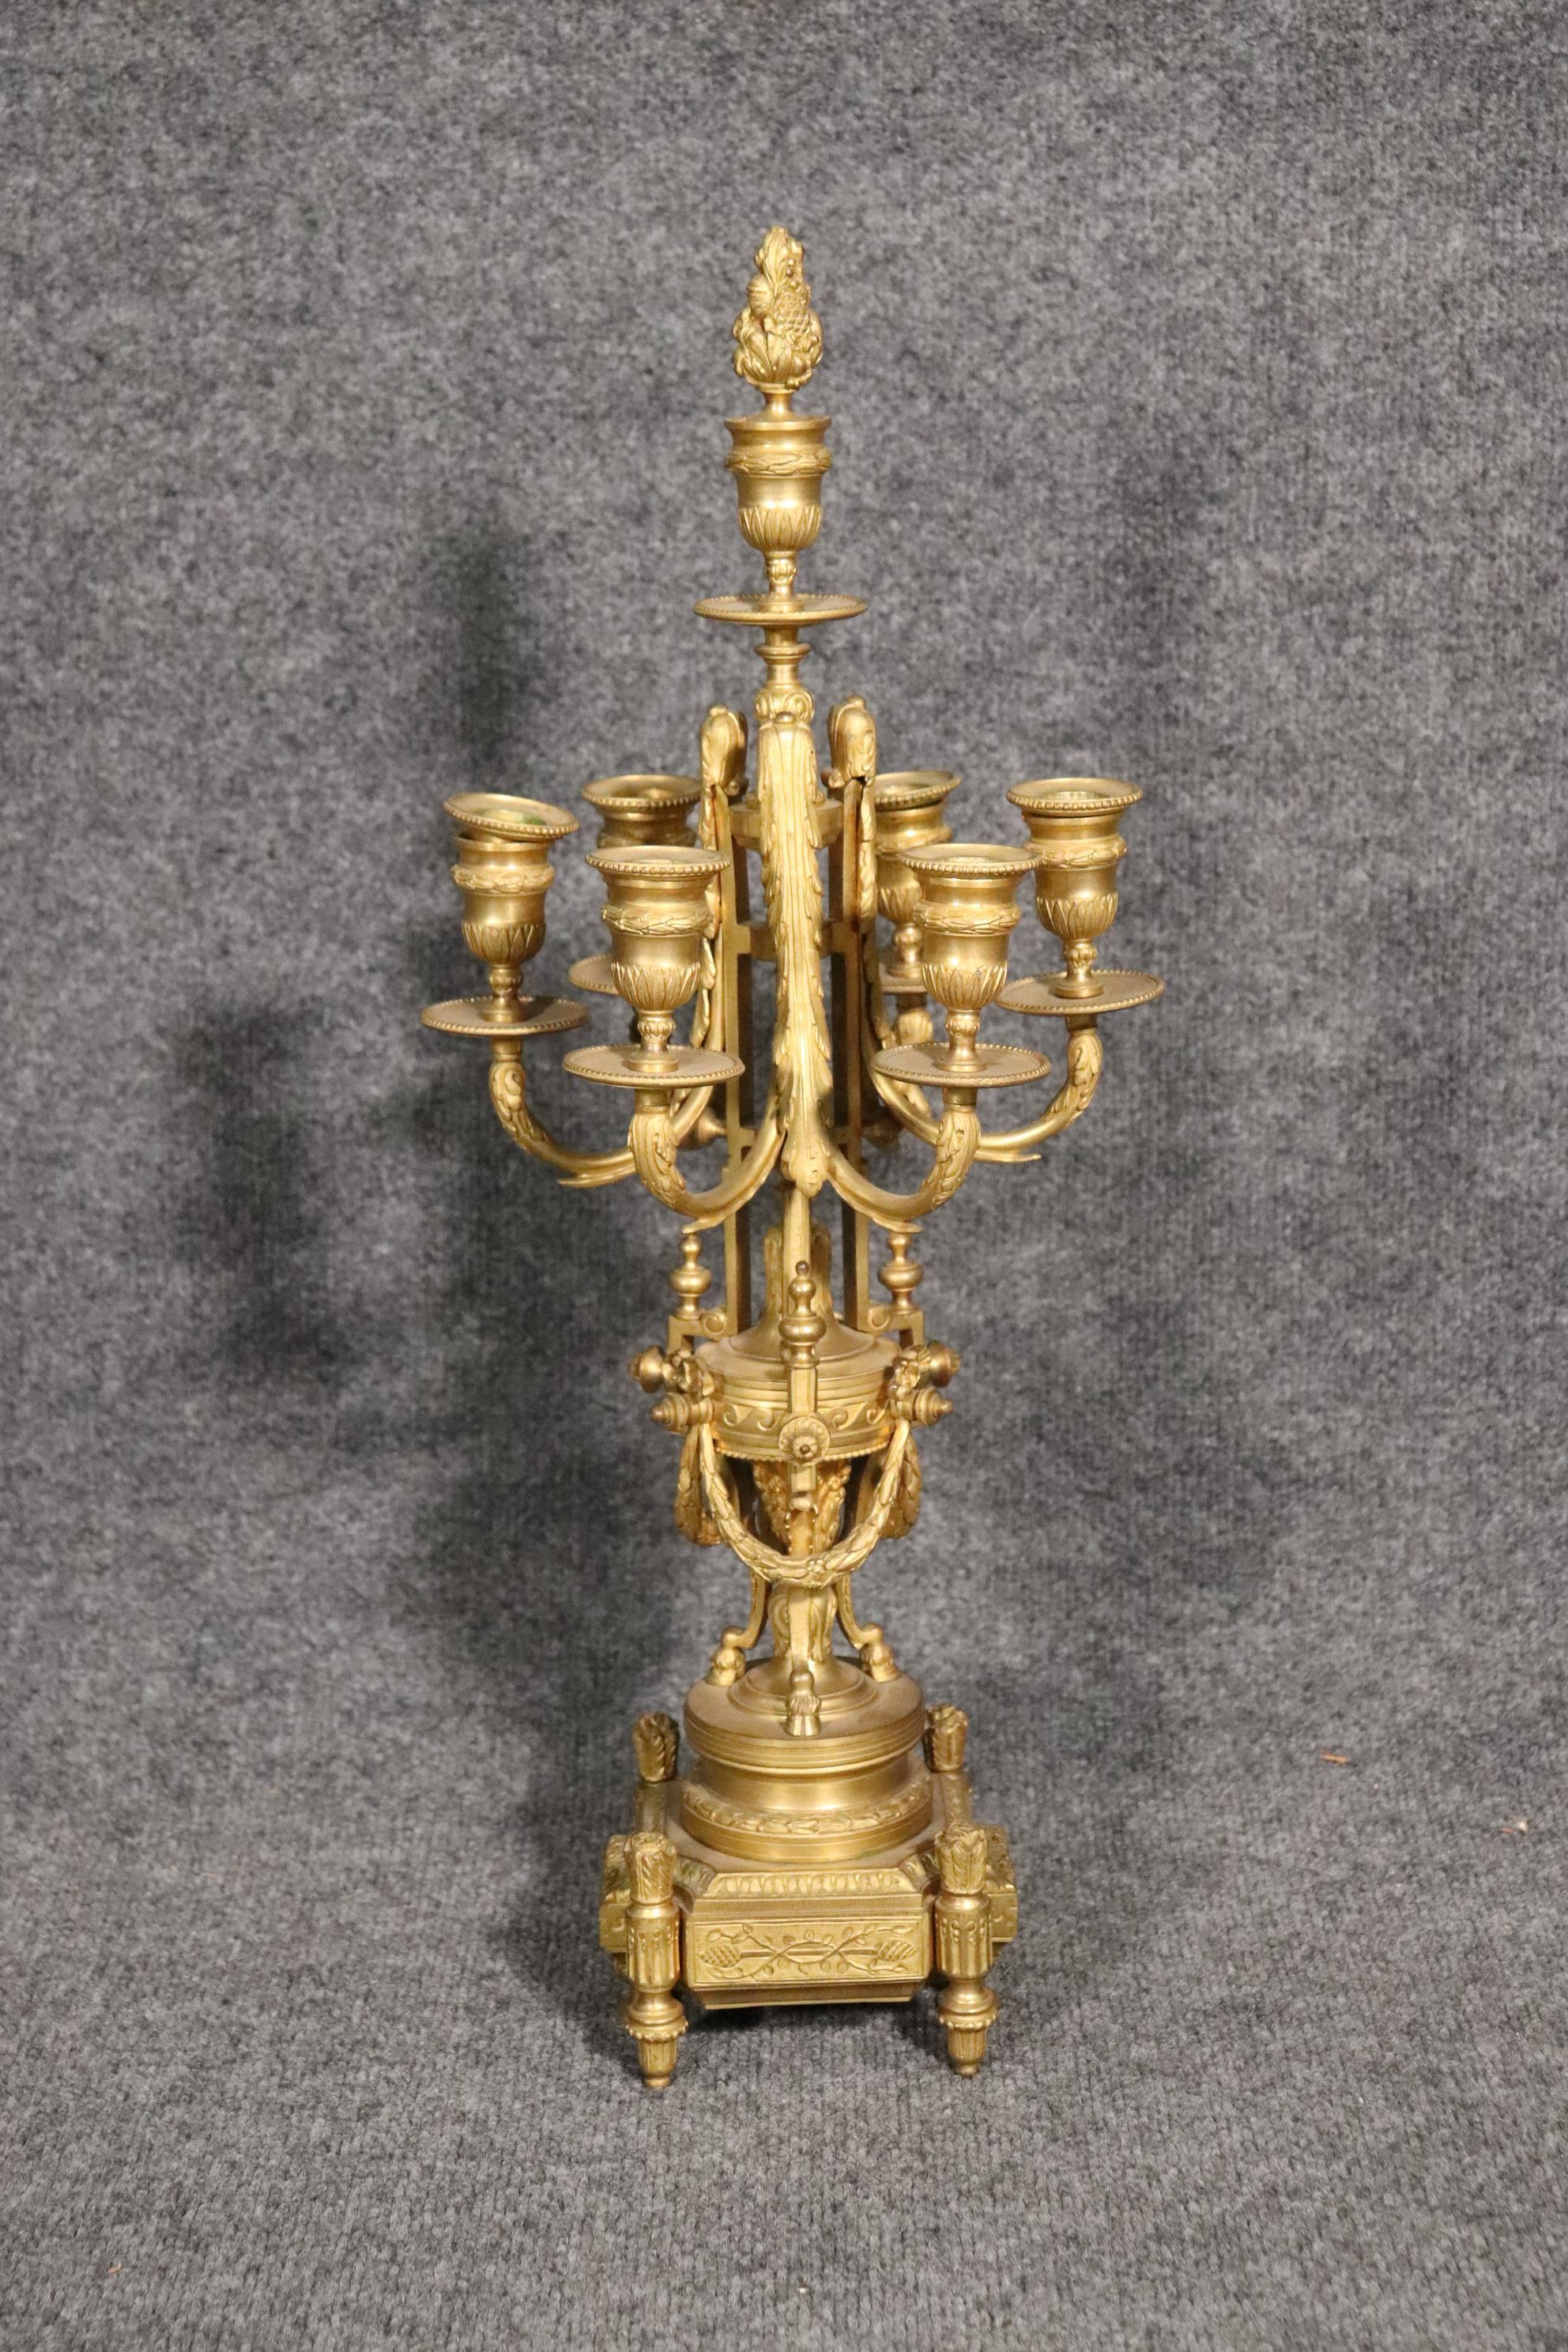 Dimensions: H: 11in W: 9.5in D: 9.5in
This beautiful pair of 19th century French Bronze Candelabras are made from the highest quality Dorè or Ormolu Bronze. The craftsmanship of these candelabras are breath taking! If you look closely you will be